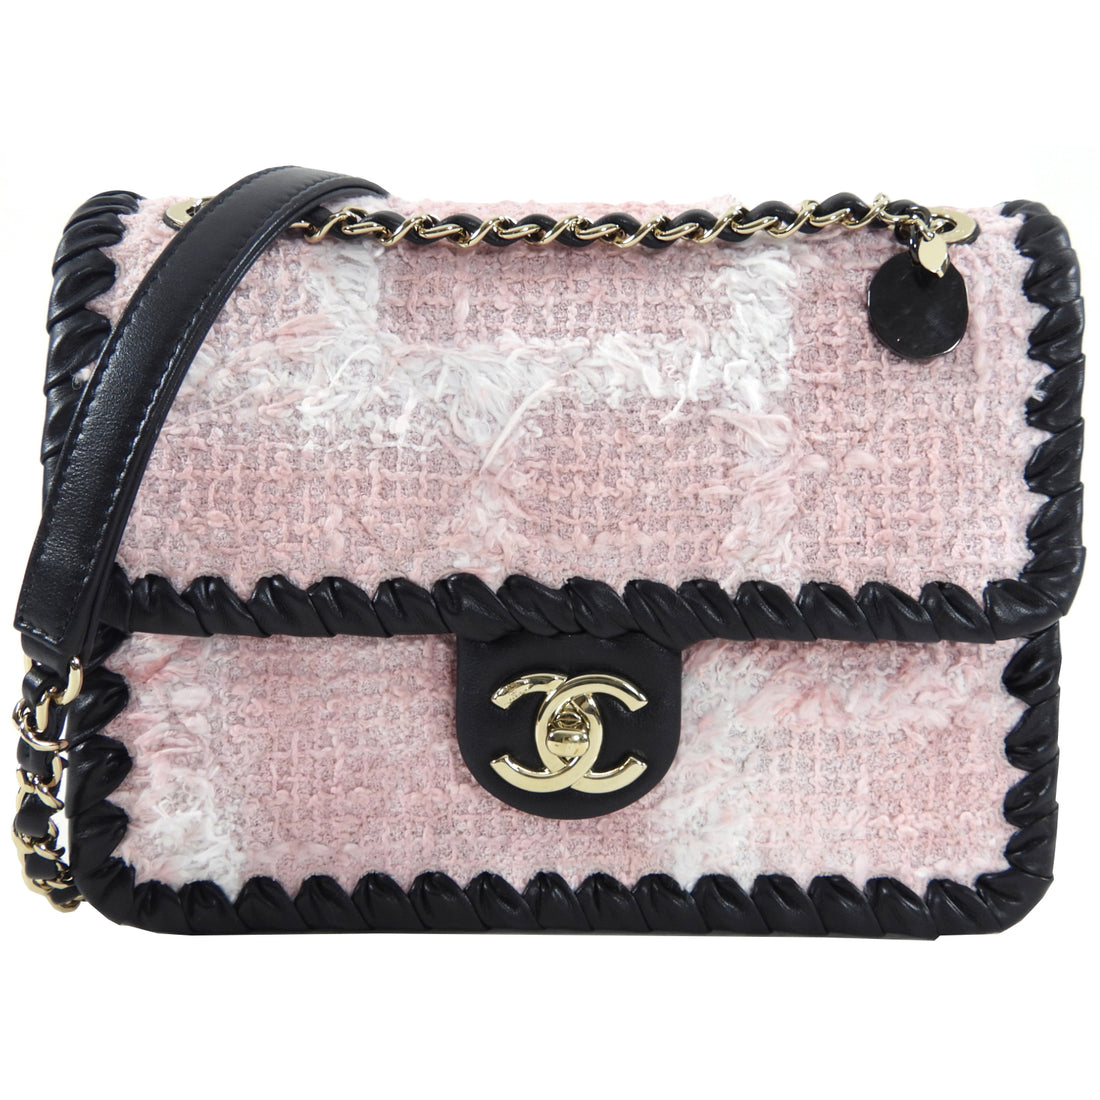 Chanel 22C Pink Tweed and Black Leather Small Flap Bag